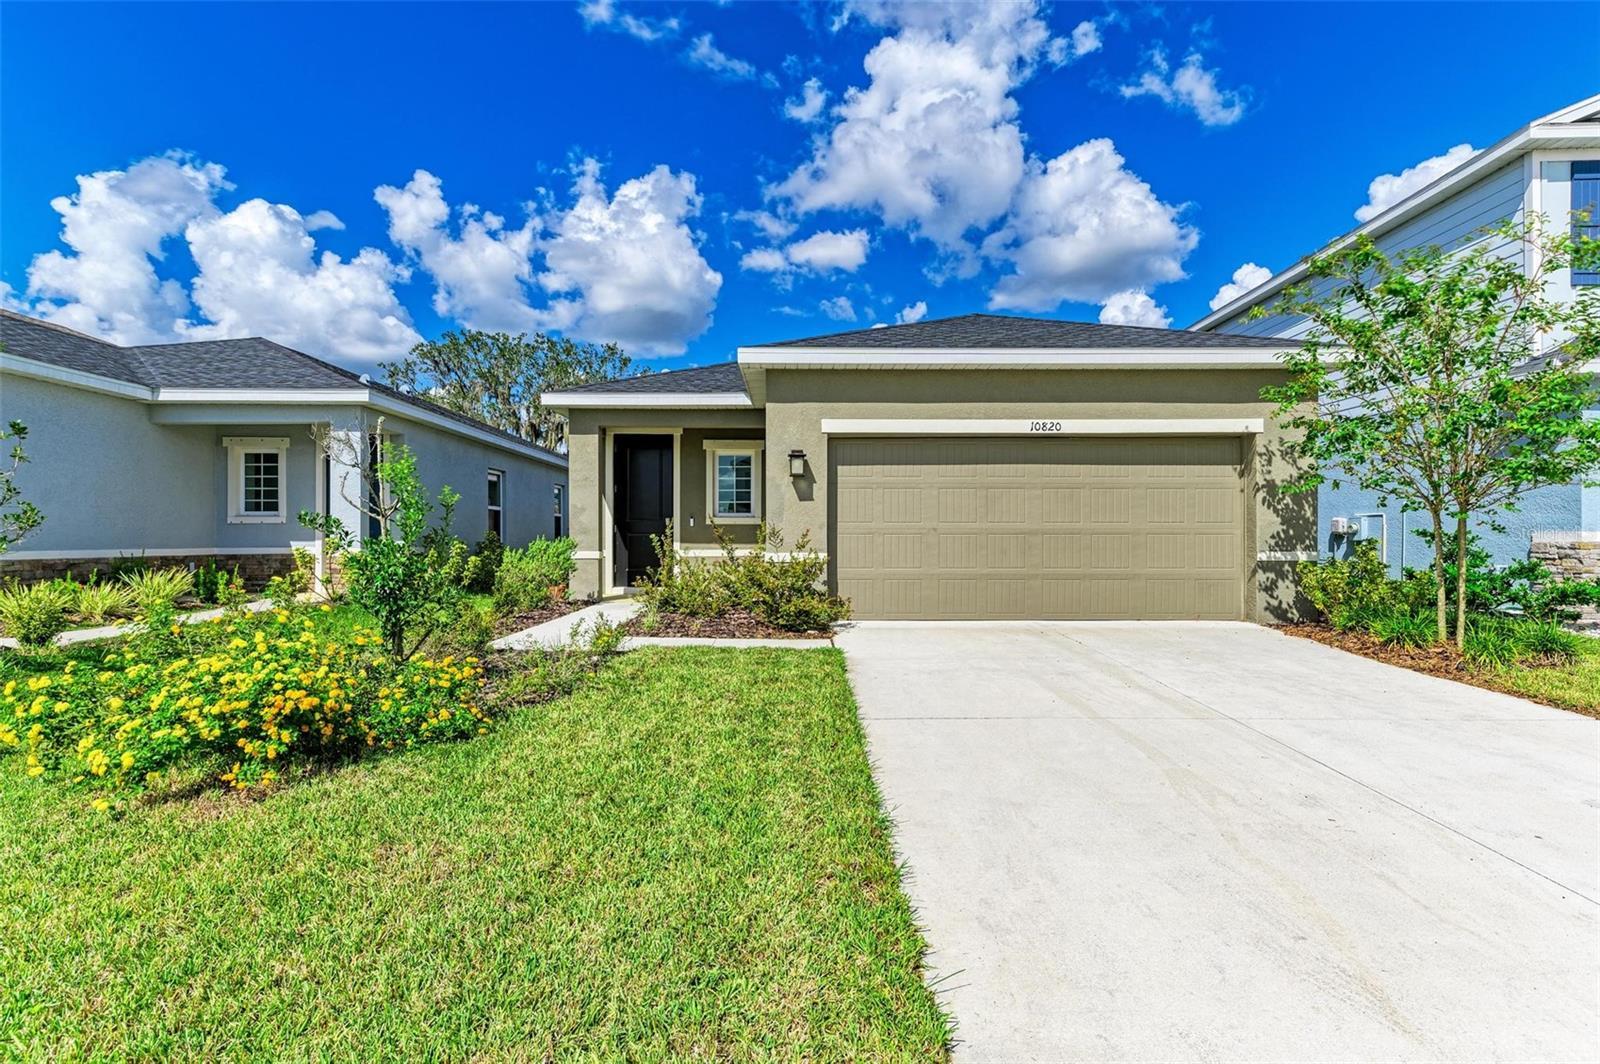 Photo one of 10820 High Noon Trl Parrish FL 34219 | MLS A4585097